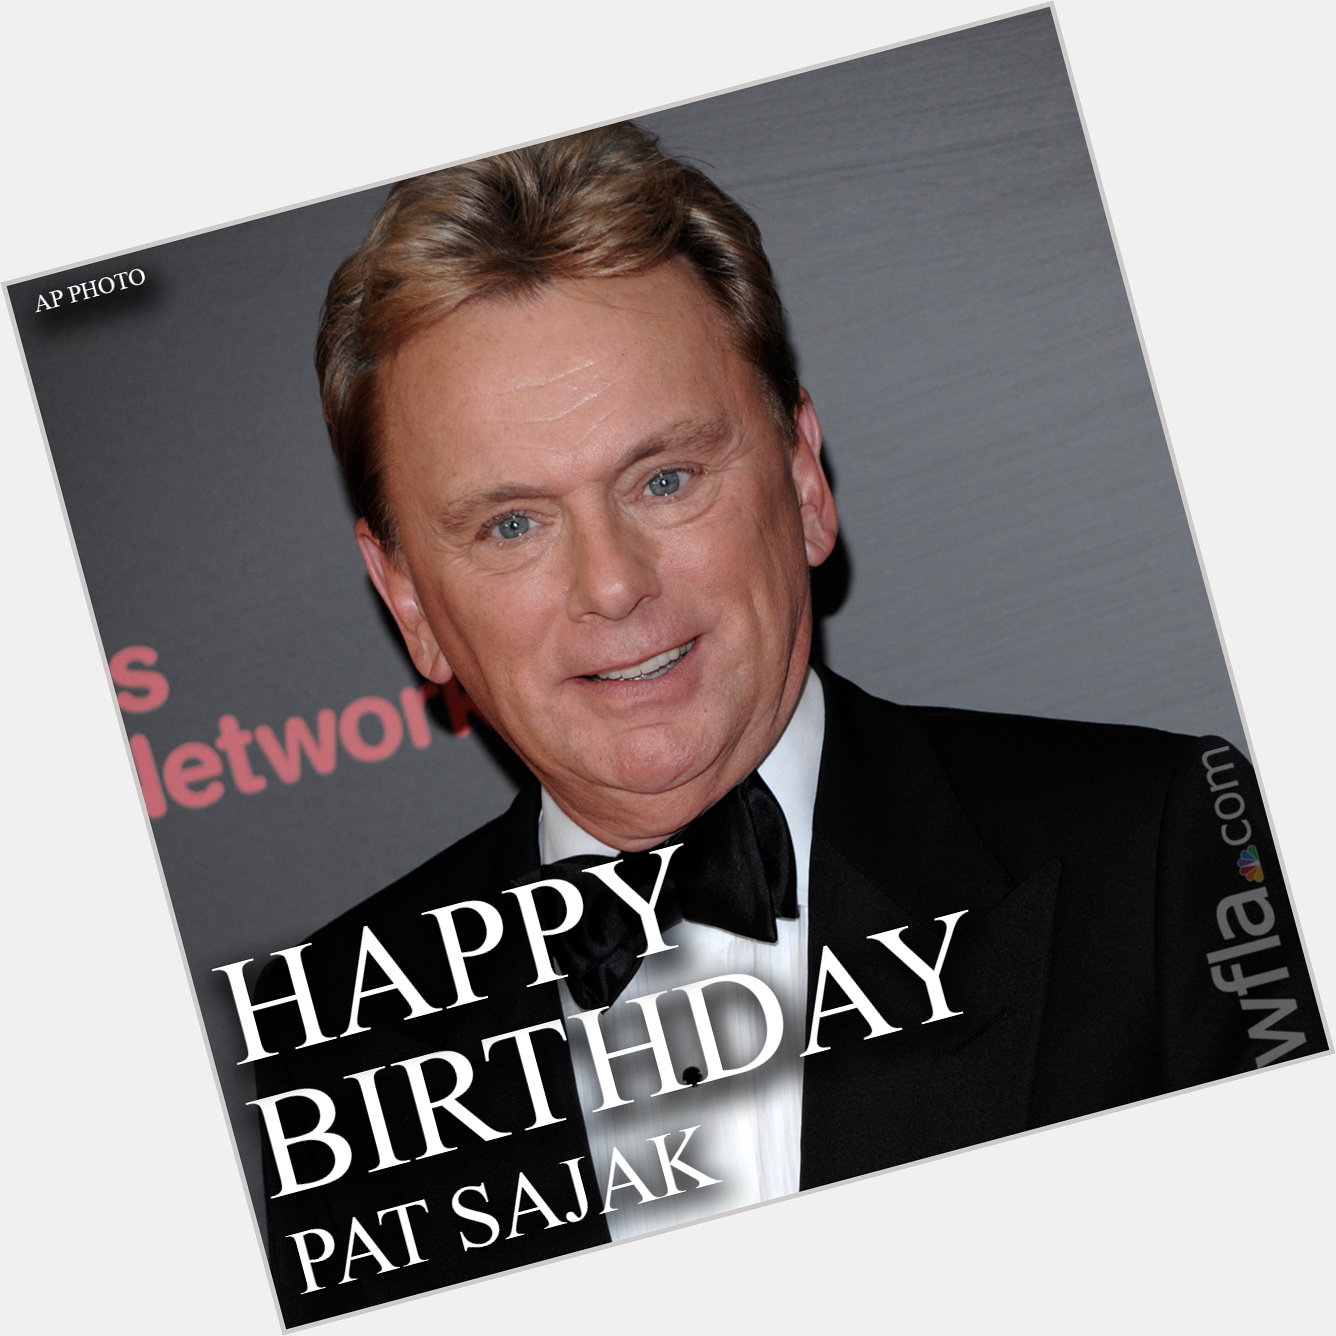 HAPPY BIRTHDAY! Pat Sajak, the host of \"Wheel of Fortune,\" turns 76 today!  